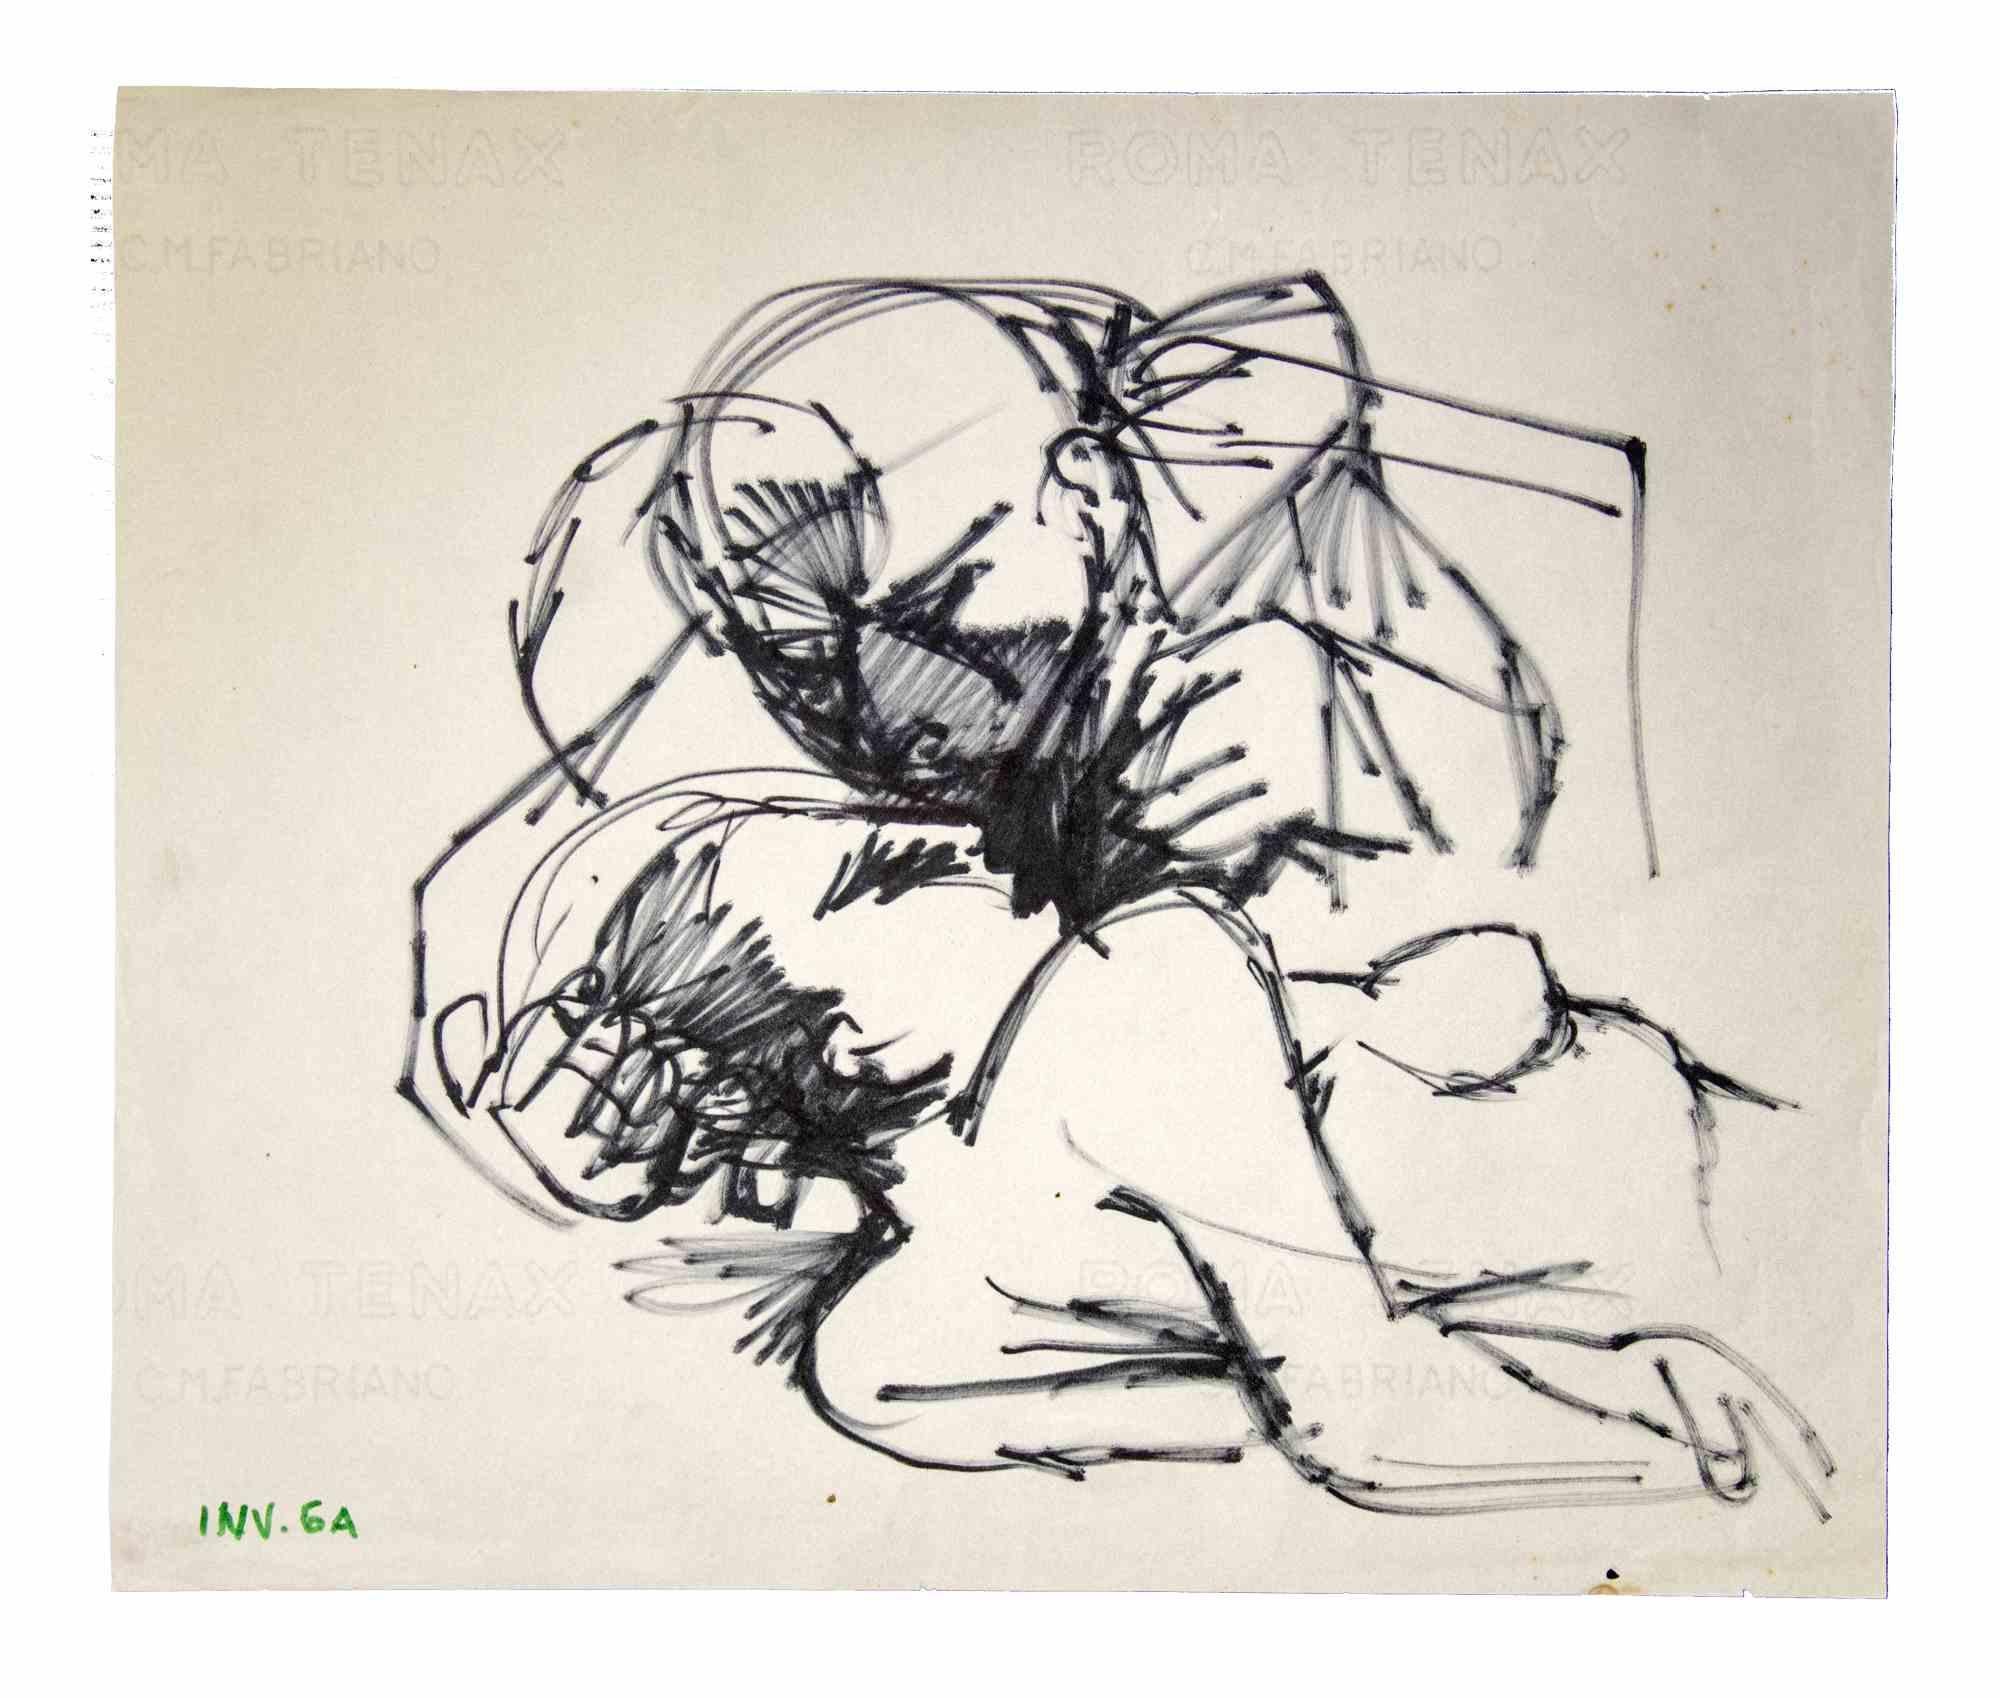 The Kiss is an original artwork realized in the 1970s. by the Italian Contemporary artist  Leo Guida  (1992 - 2017).

Original drawing in black marker on ivory-colored paper.

Good conditions.

The artwork represents a kissing scene through quick